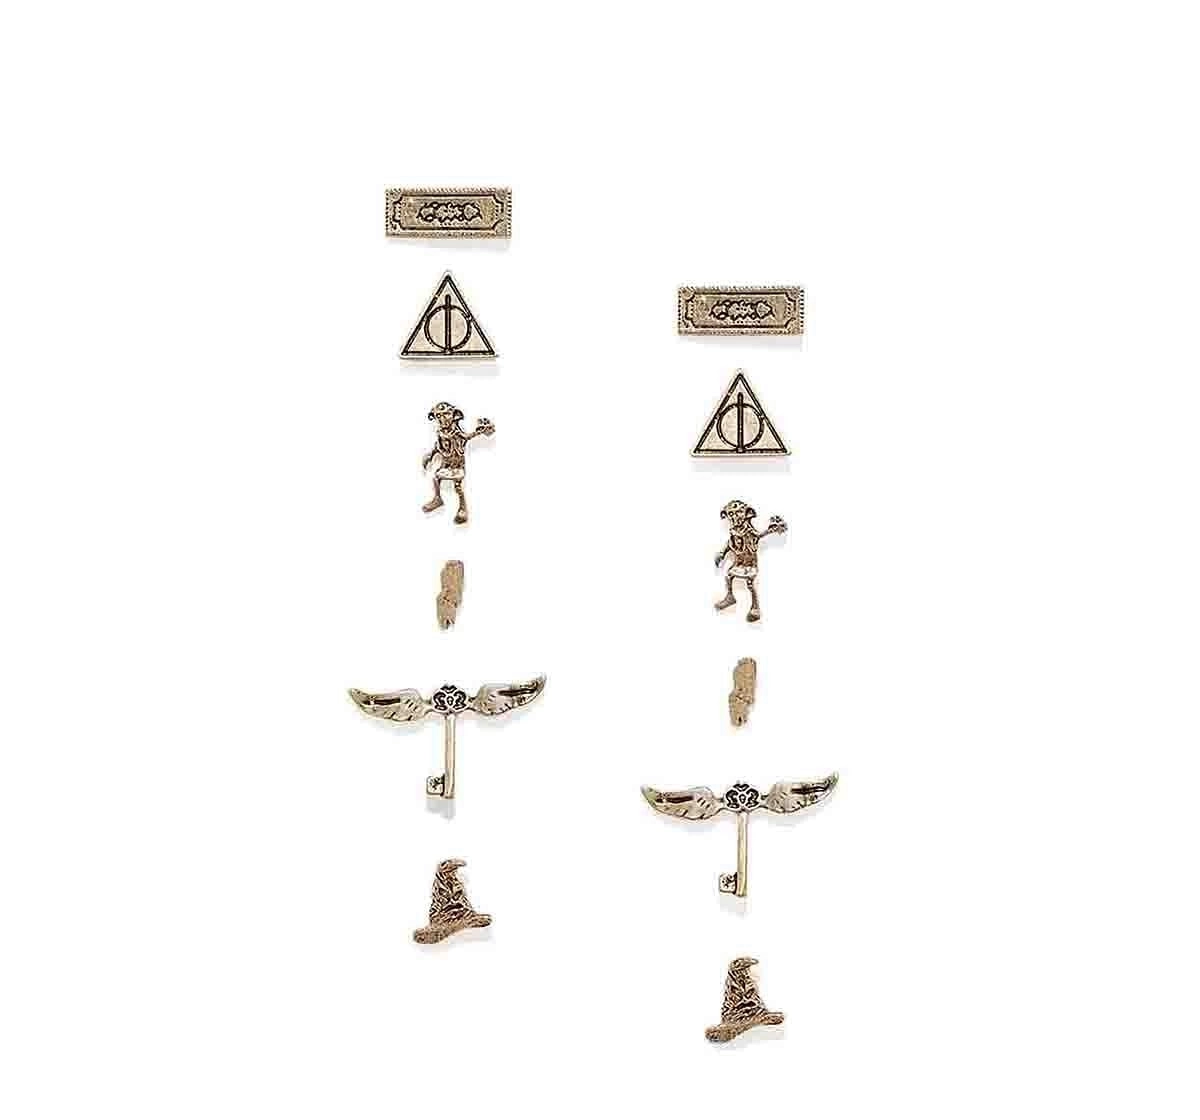 20 Best Harry Potter Earrings to Make Any Outfit Magical - Bona Fide  Bookworm